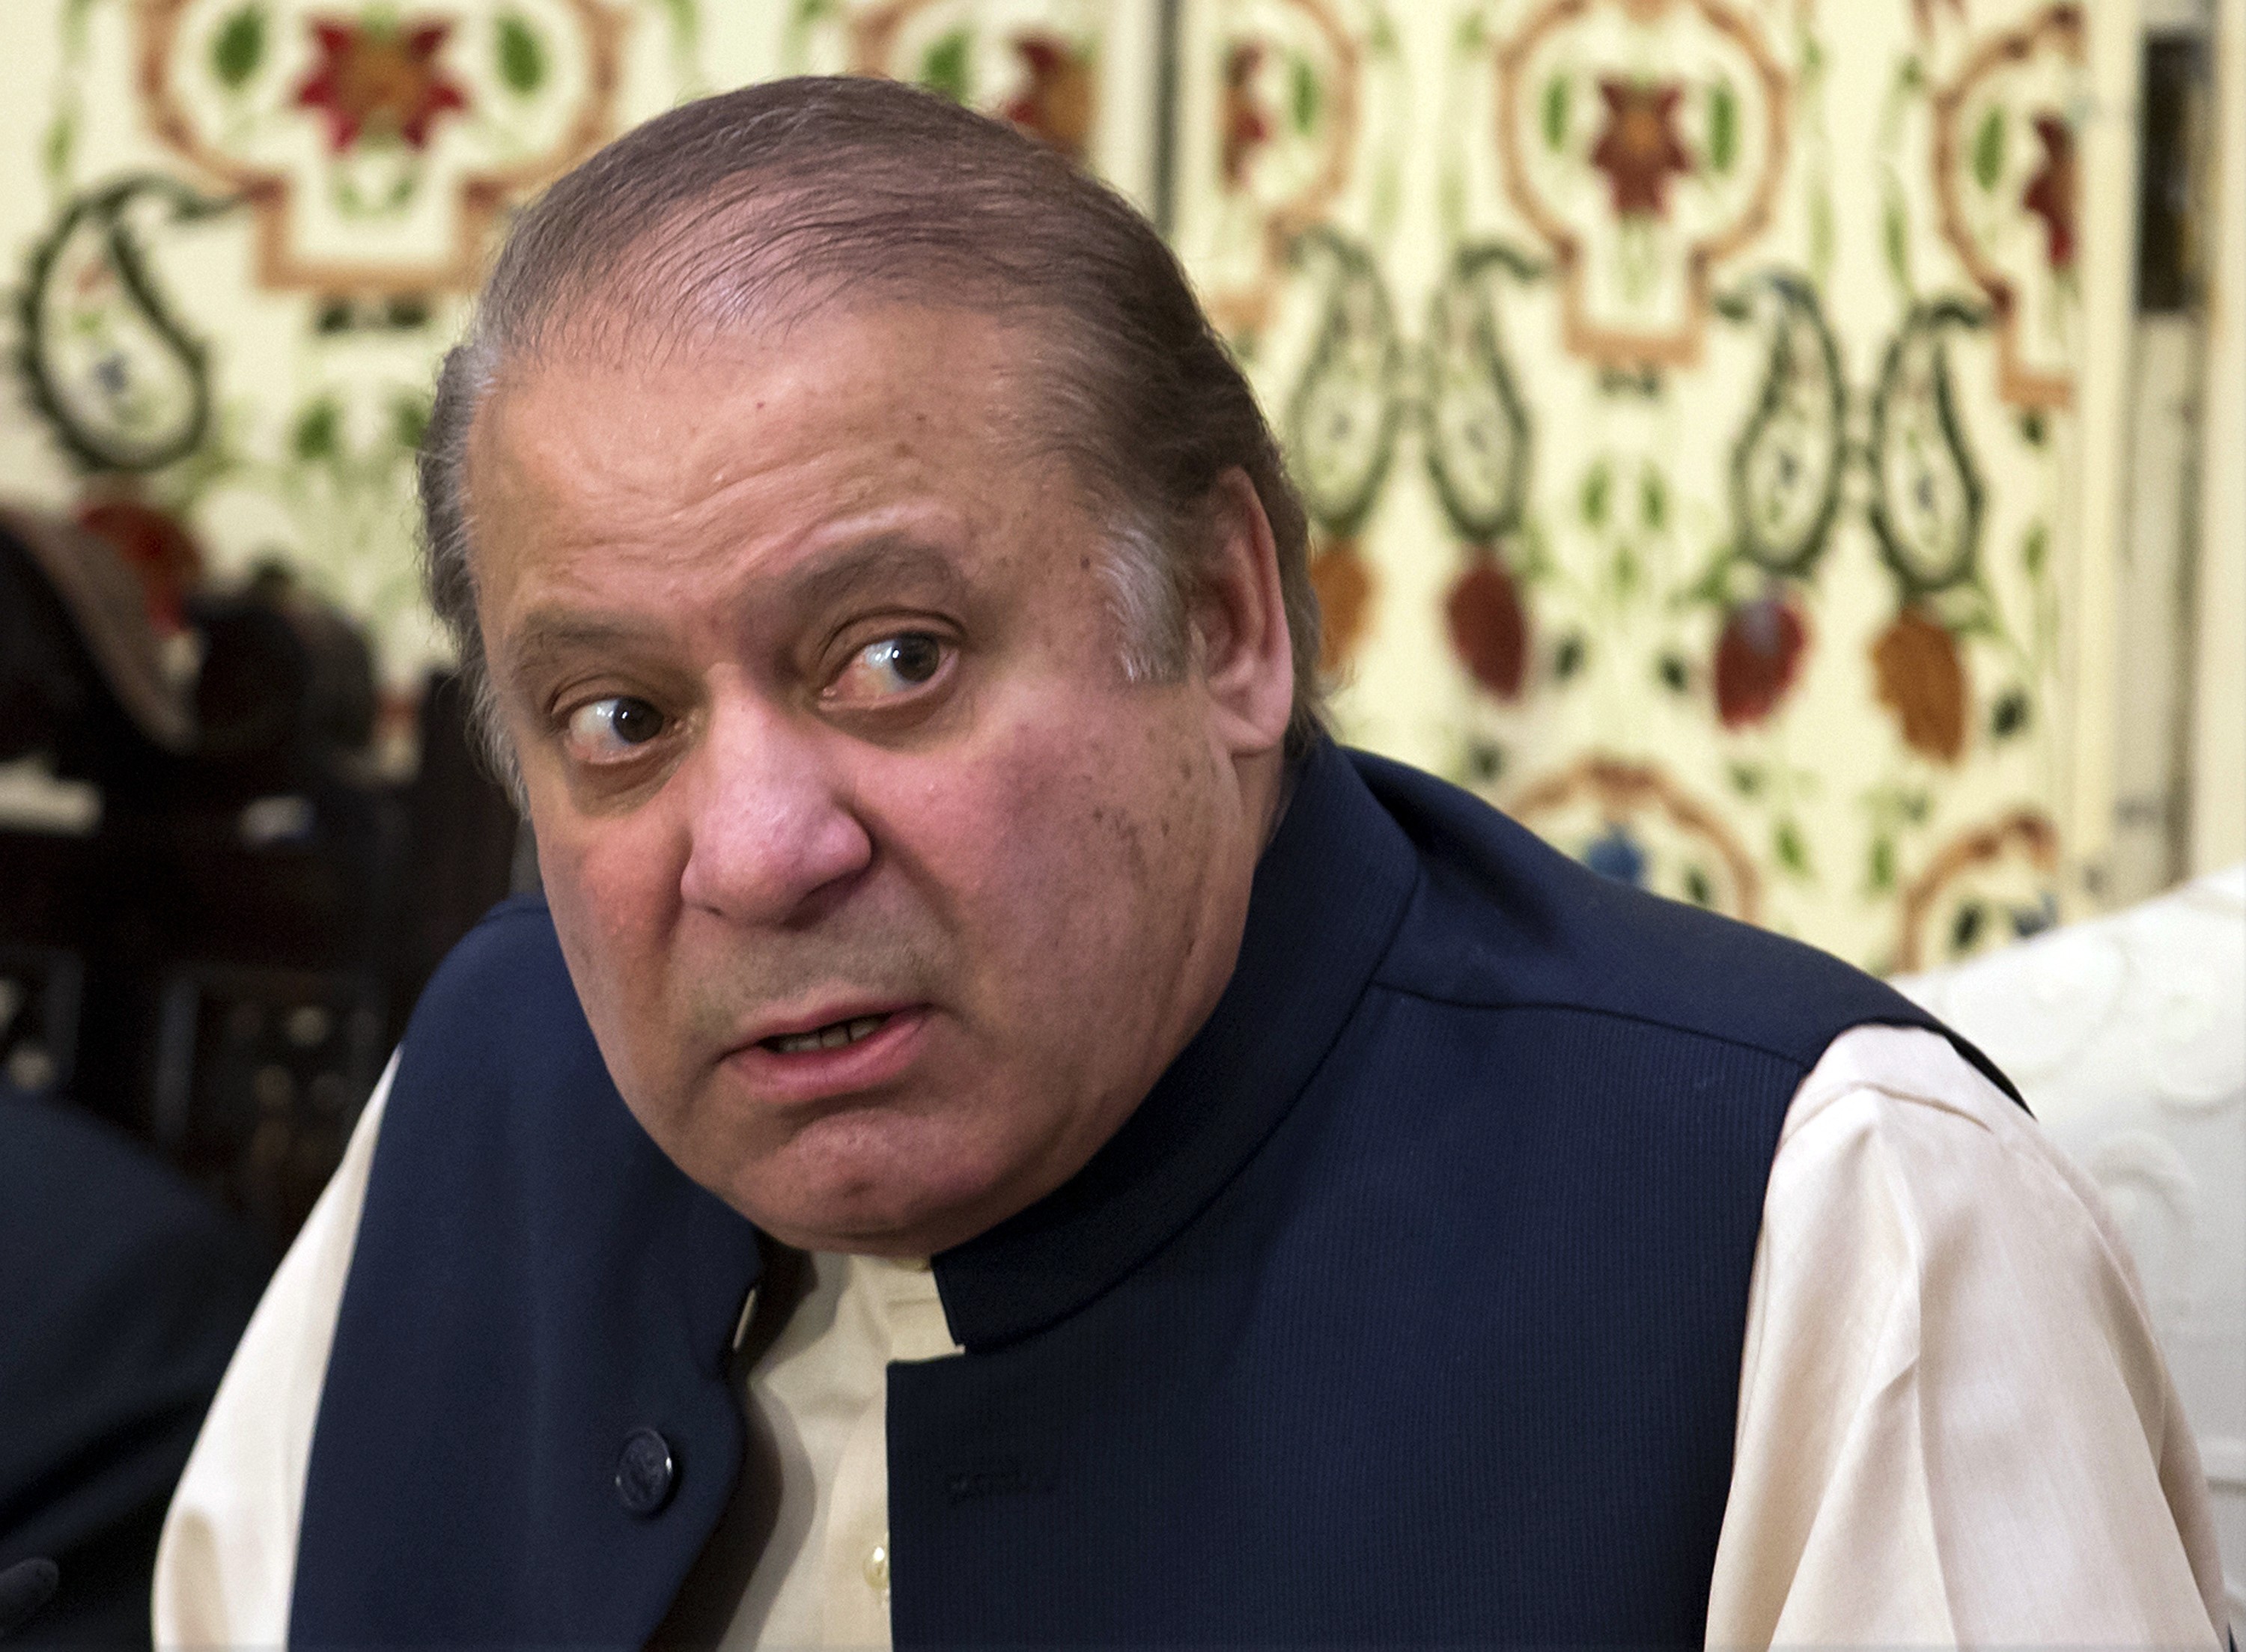 FILE – In this Sept. 26, 2017 file photo, Pakistan's former Prime Minister Nawaz Sharif addresses a news conference in Islamabad, Pakistan. Pakistan’s anti-corruption authorities early Monday, Oct. 9, 2017 arrested the son-in-law of former Prime Minister Nawaz Sharif in connection with corruption cases pending against him. (AP Photo/B.K. Bangash, File)